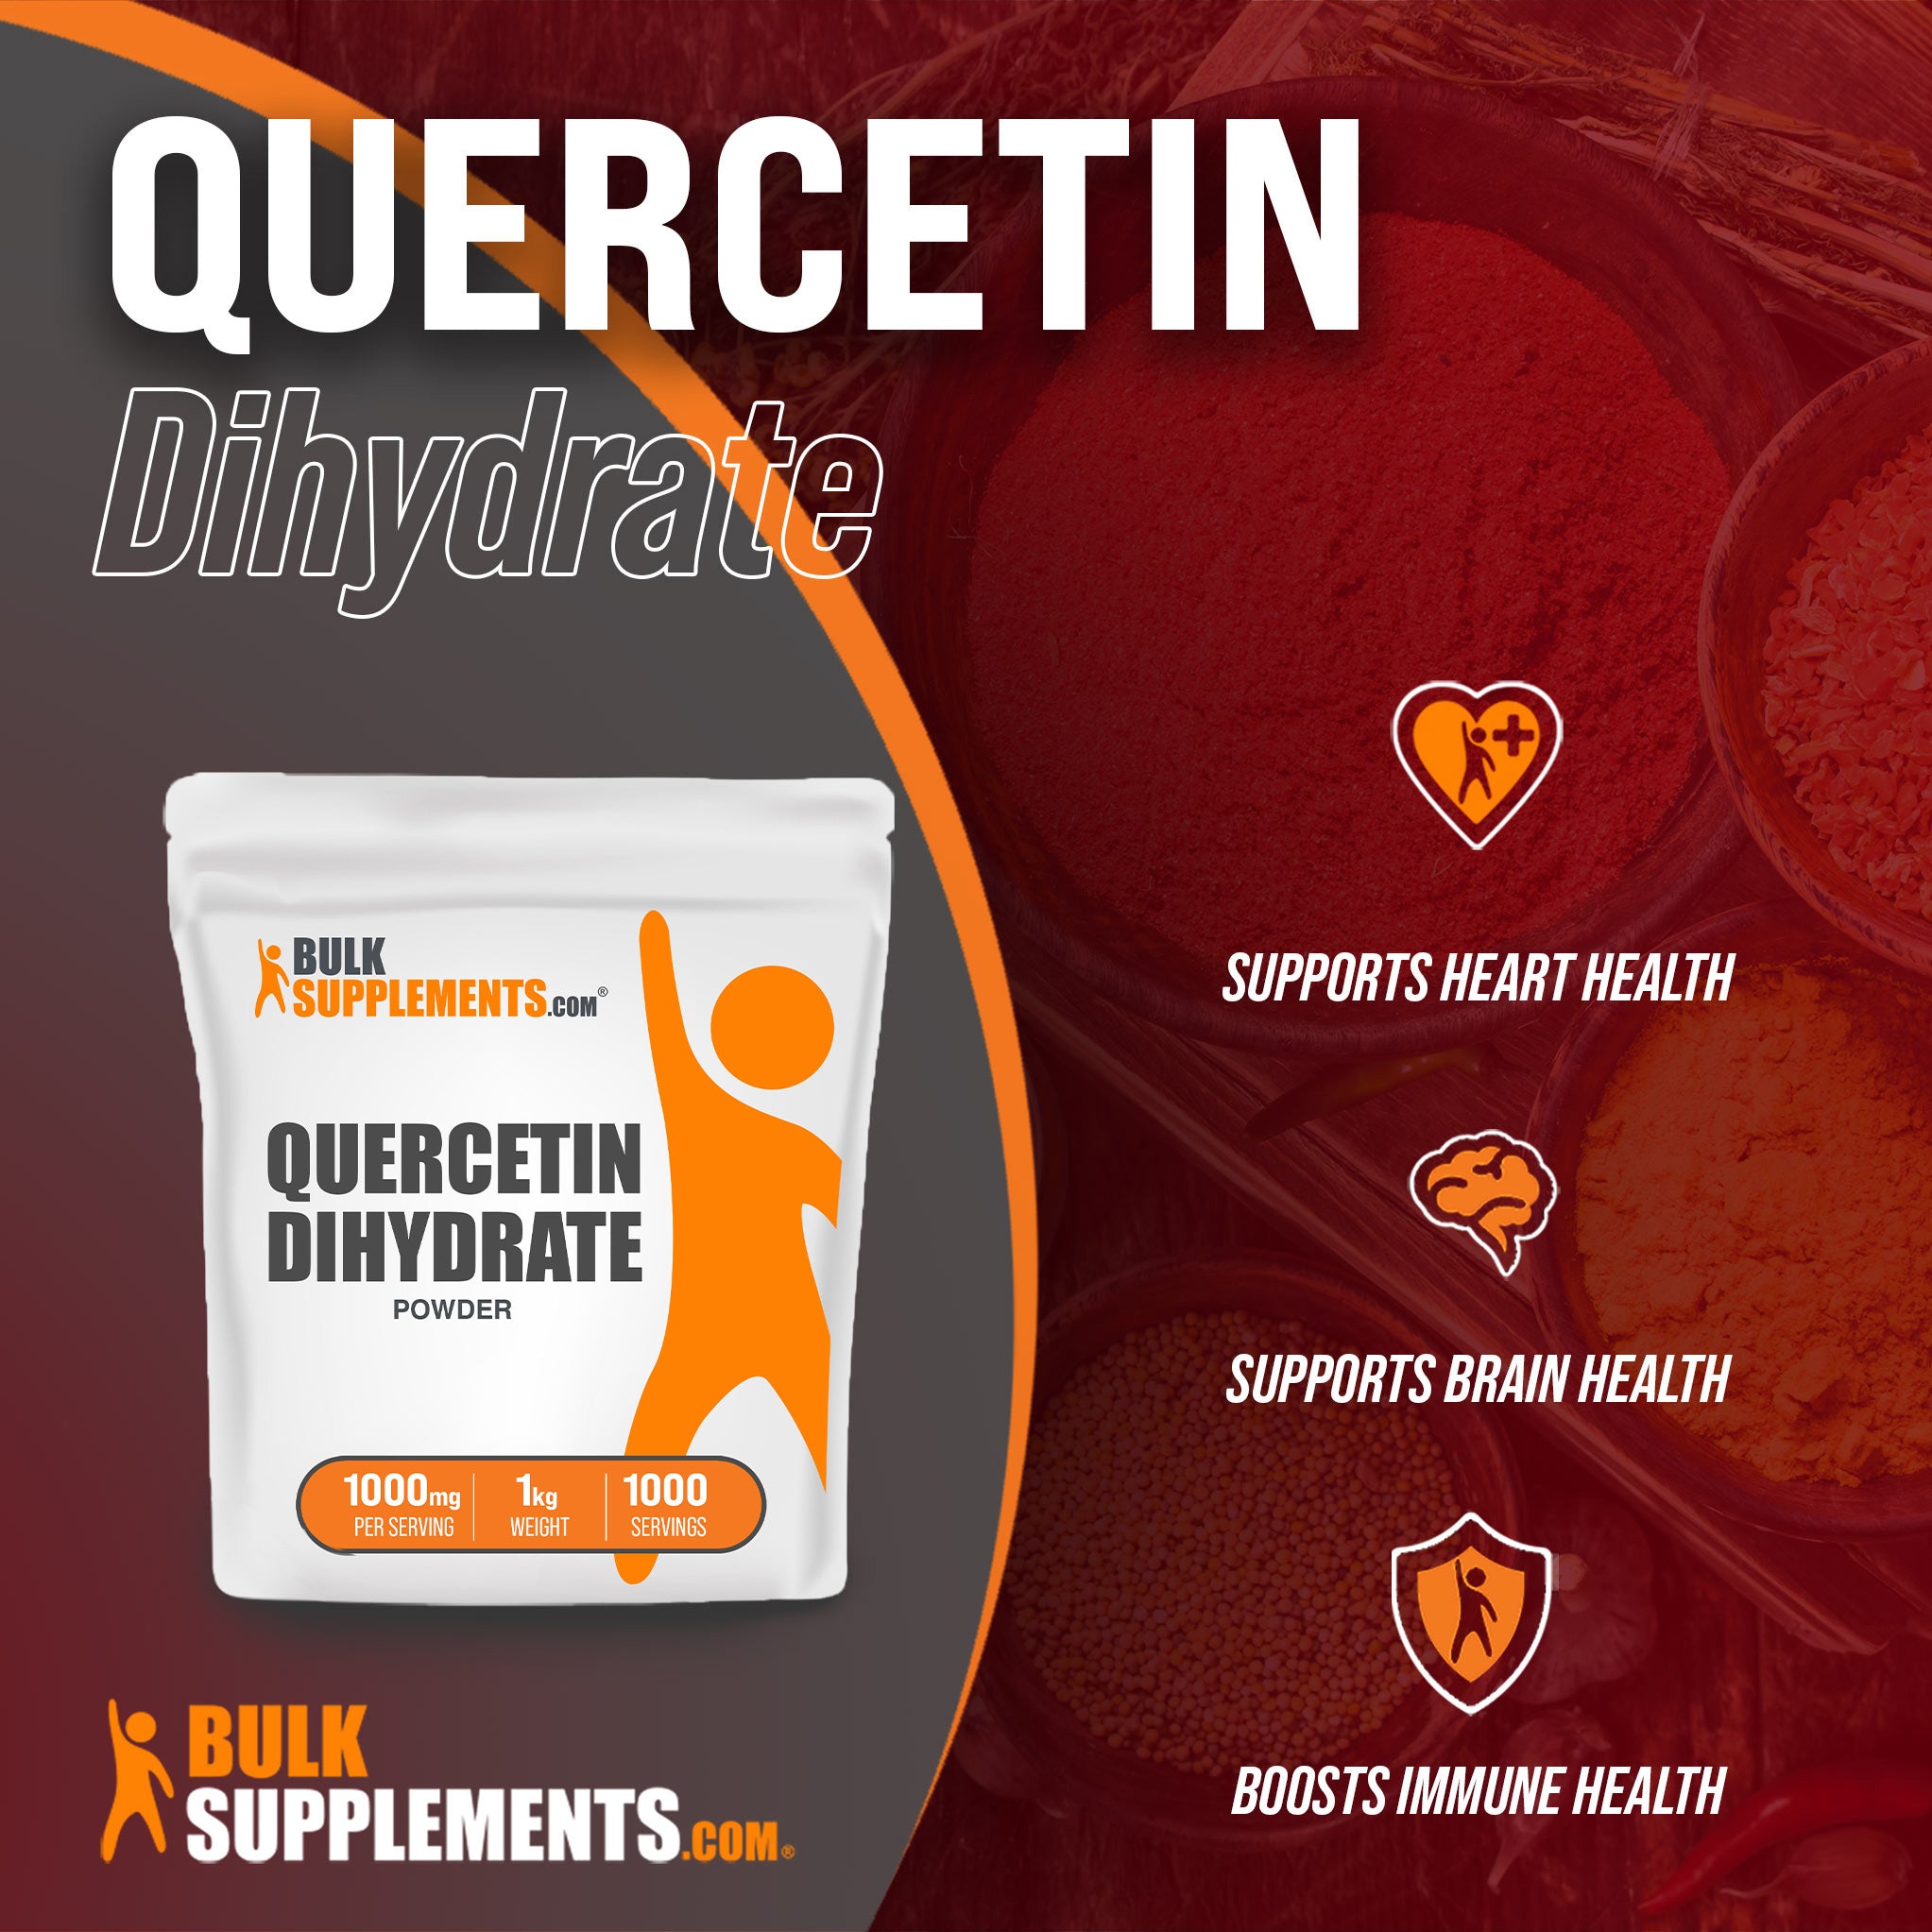 Benefits of Quercetin Dihydrate: supports heart health, supports brain health, boosts immune health